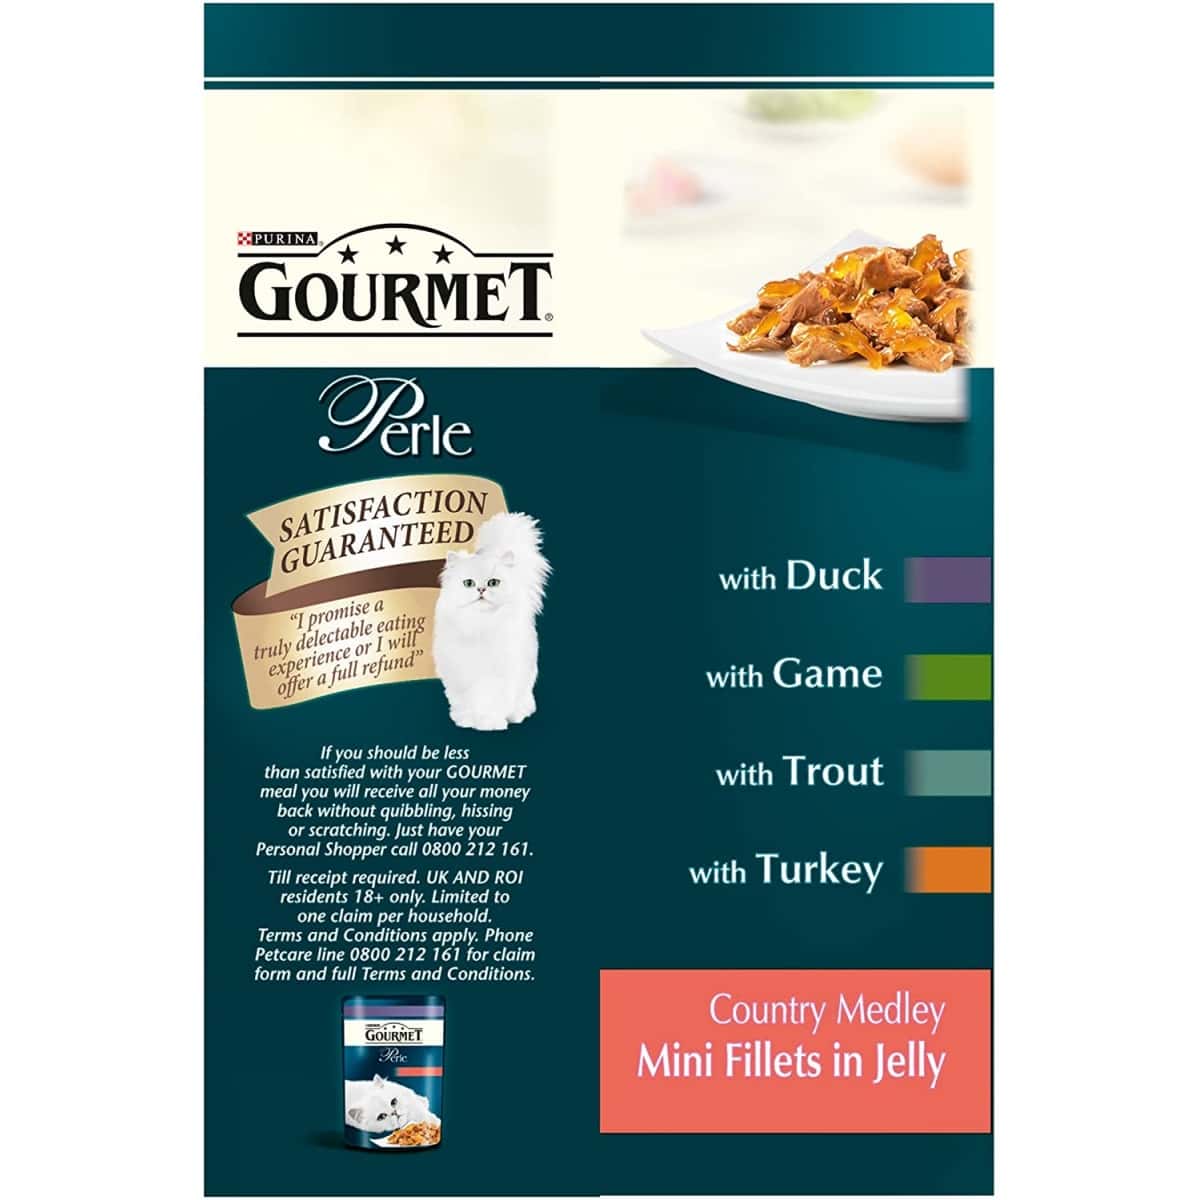 Gourmet Perle Country Medley in Jelly 12 Pack Product Image